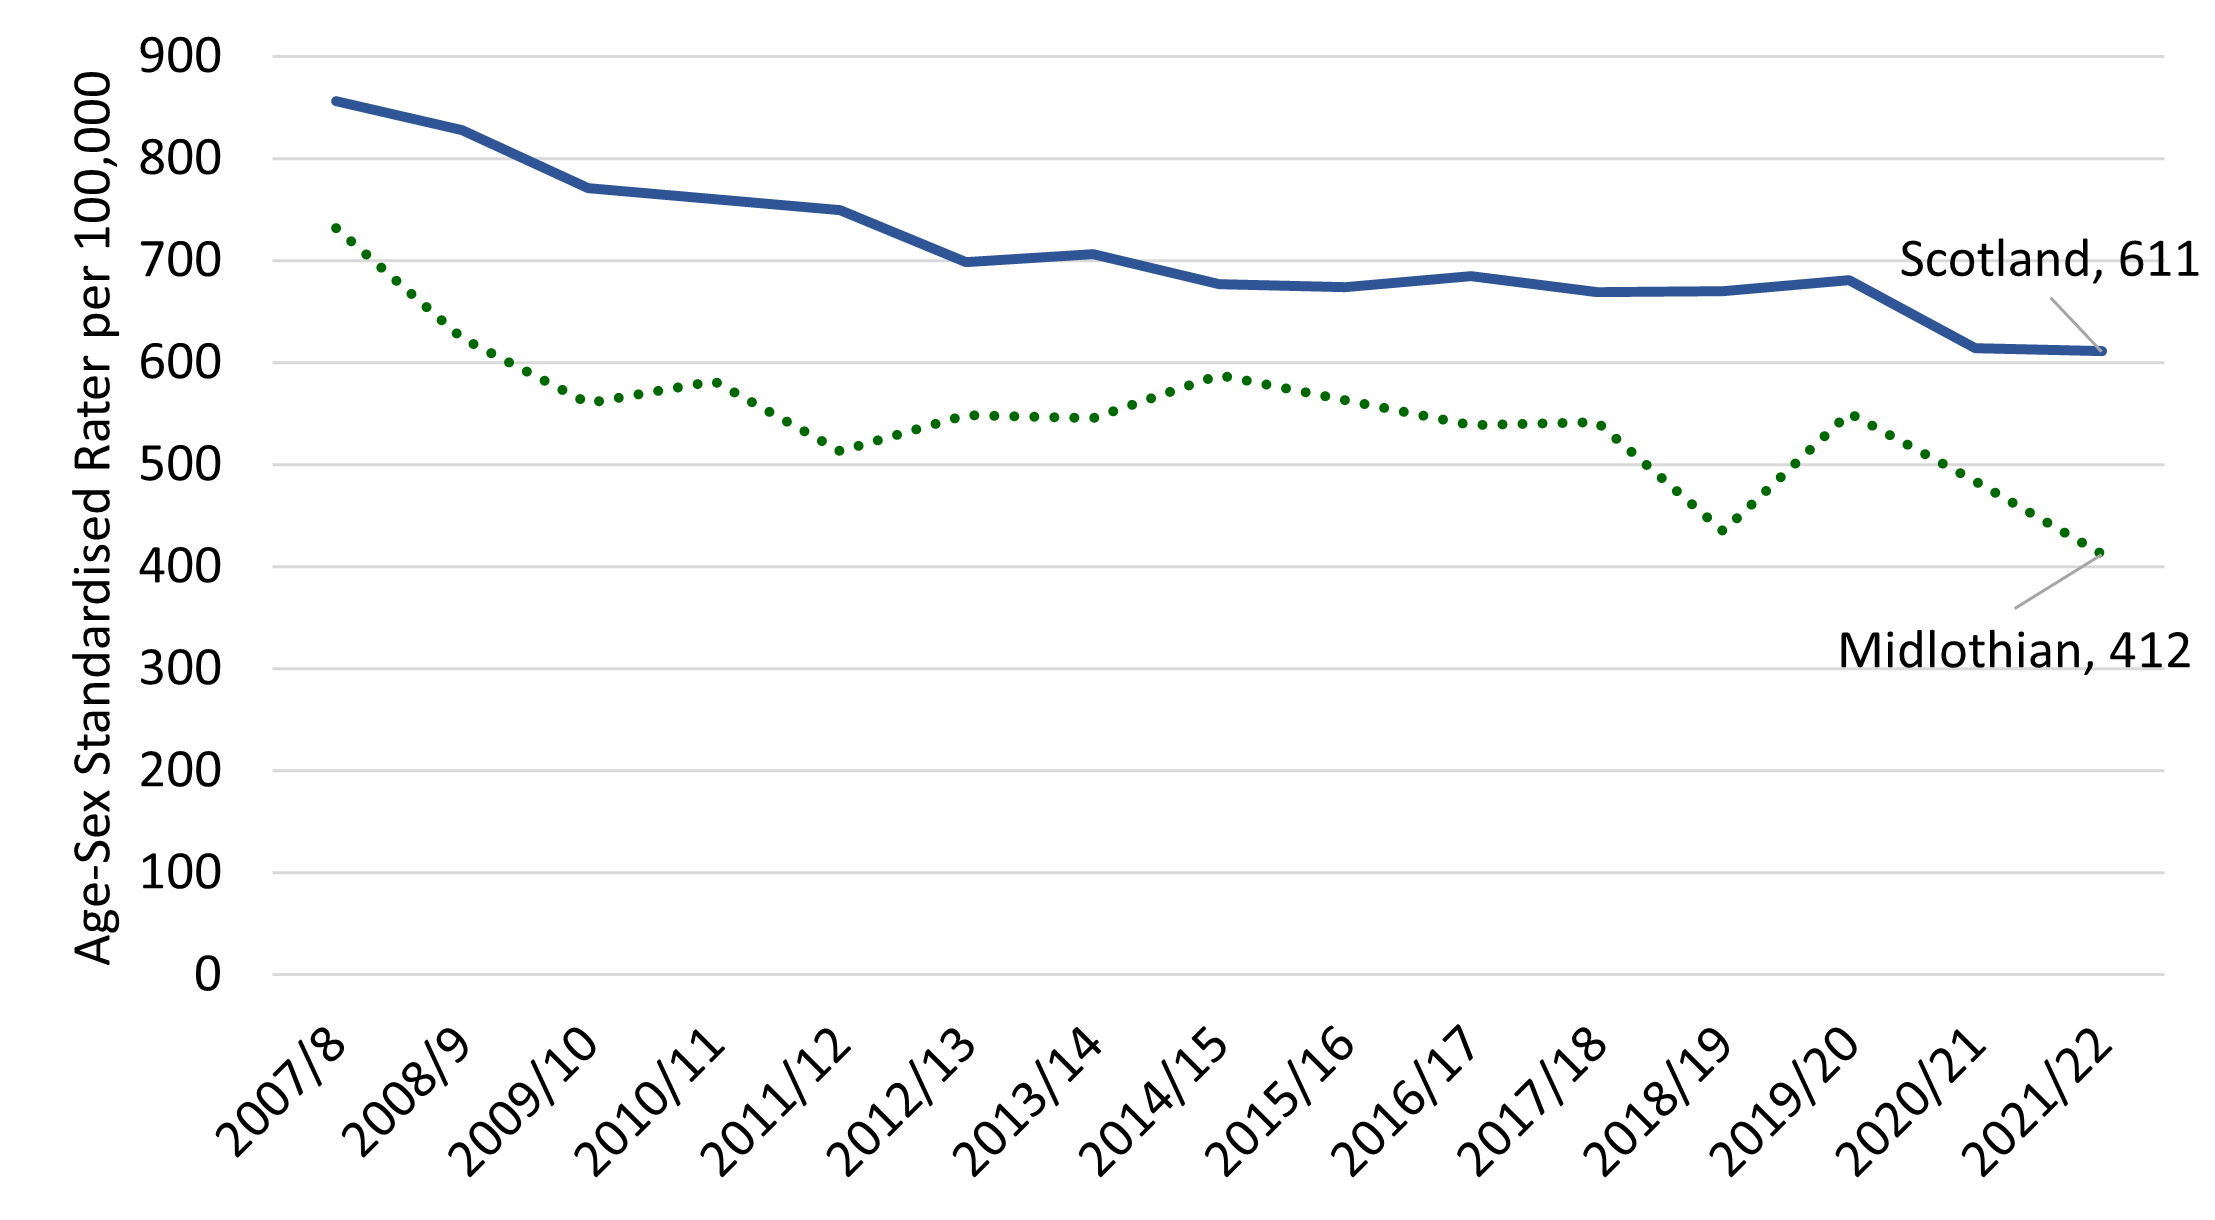 Alcohol related hospital admissions reduced gradually in both Midlothian and Scotland over the 15 year period up to 2021/22  Rates in Midlothian were consistently lower than National rates, with 412 hospital admission per 100,000 in Midlothian and 611 per 100,000 in Scotland by 2021/2022.